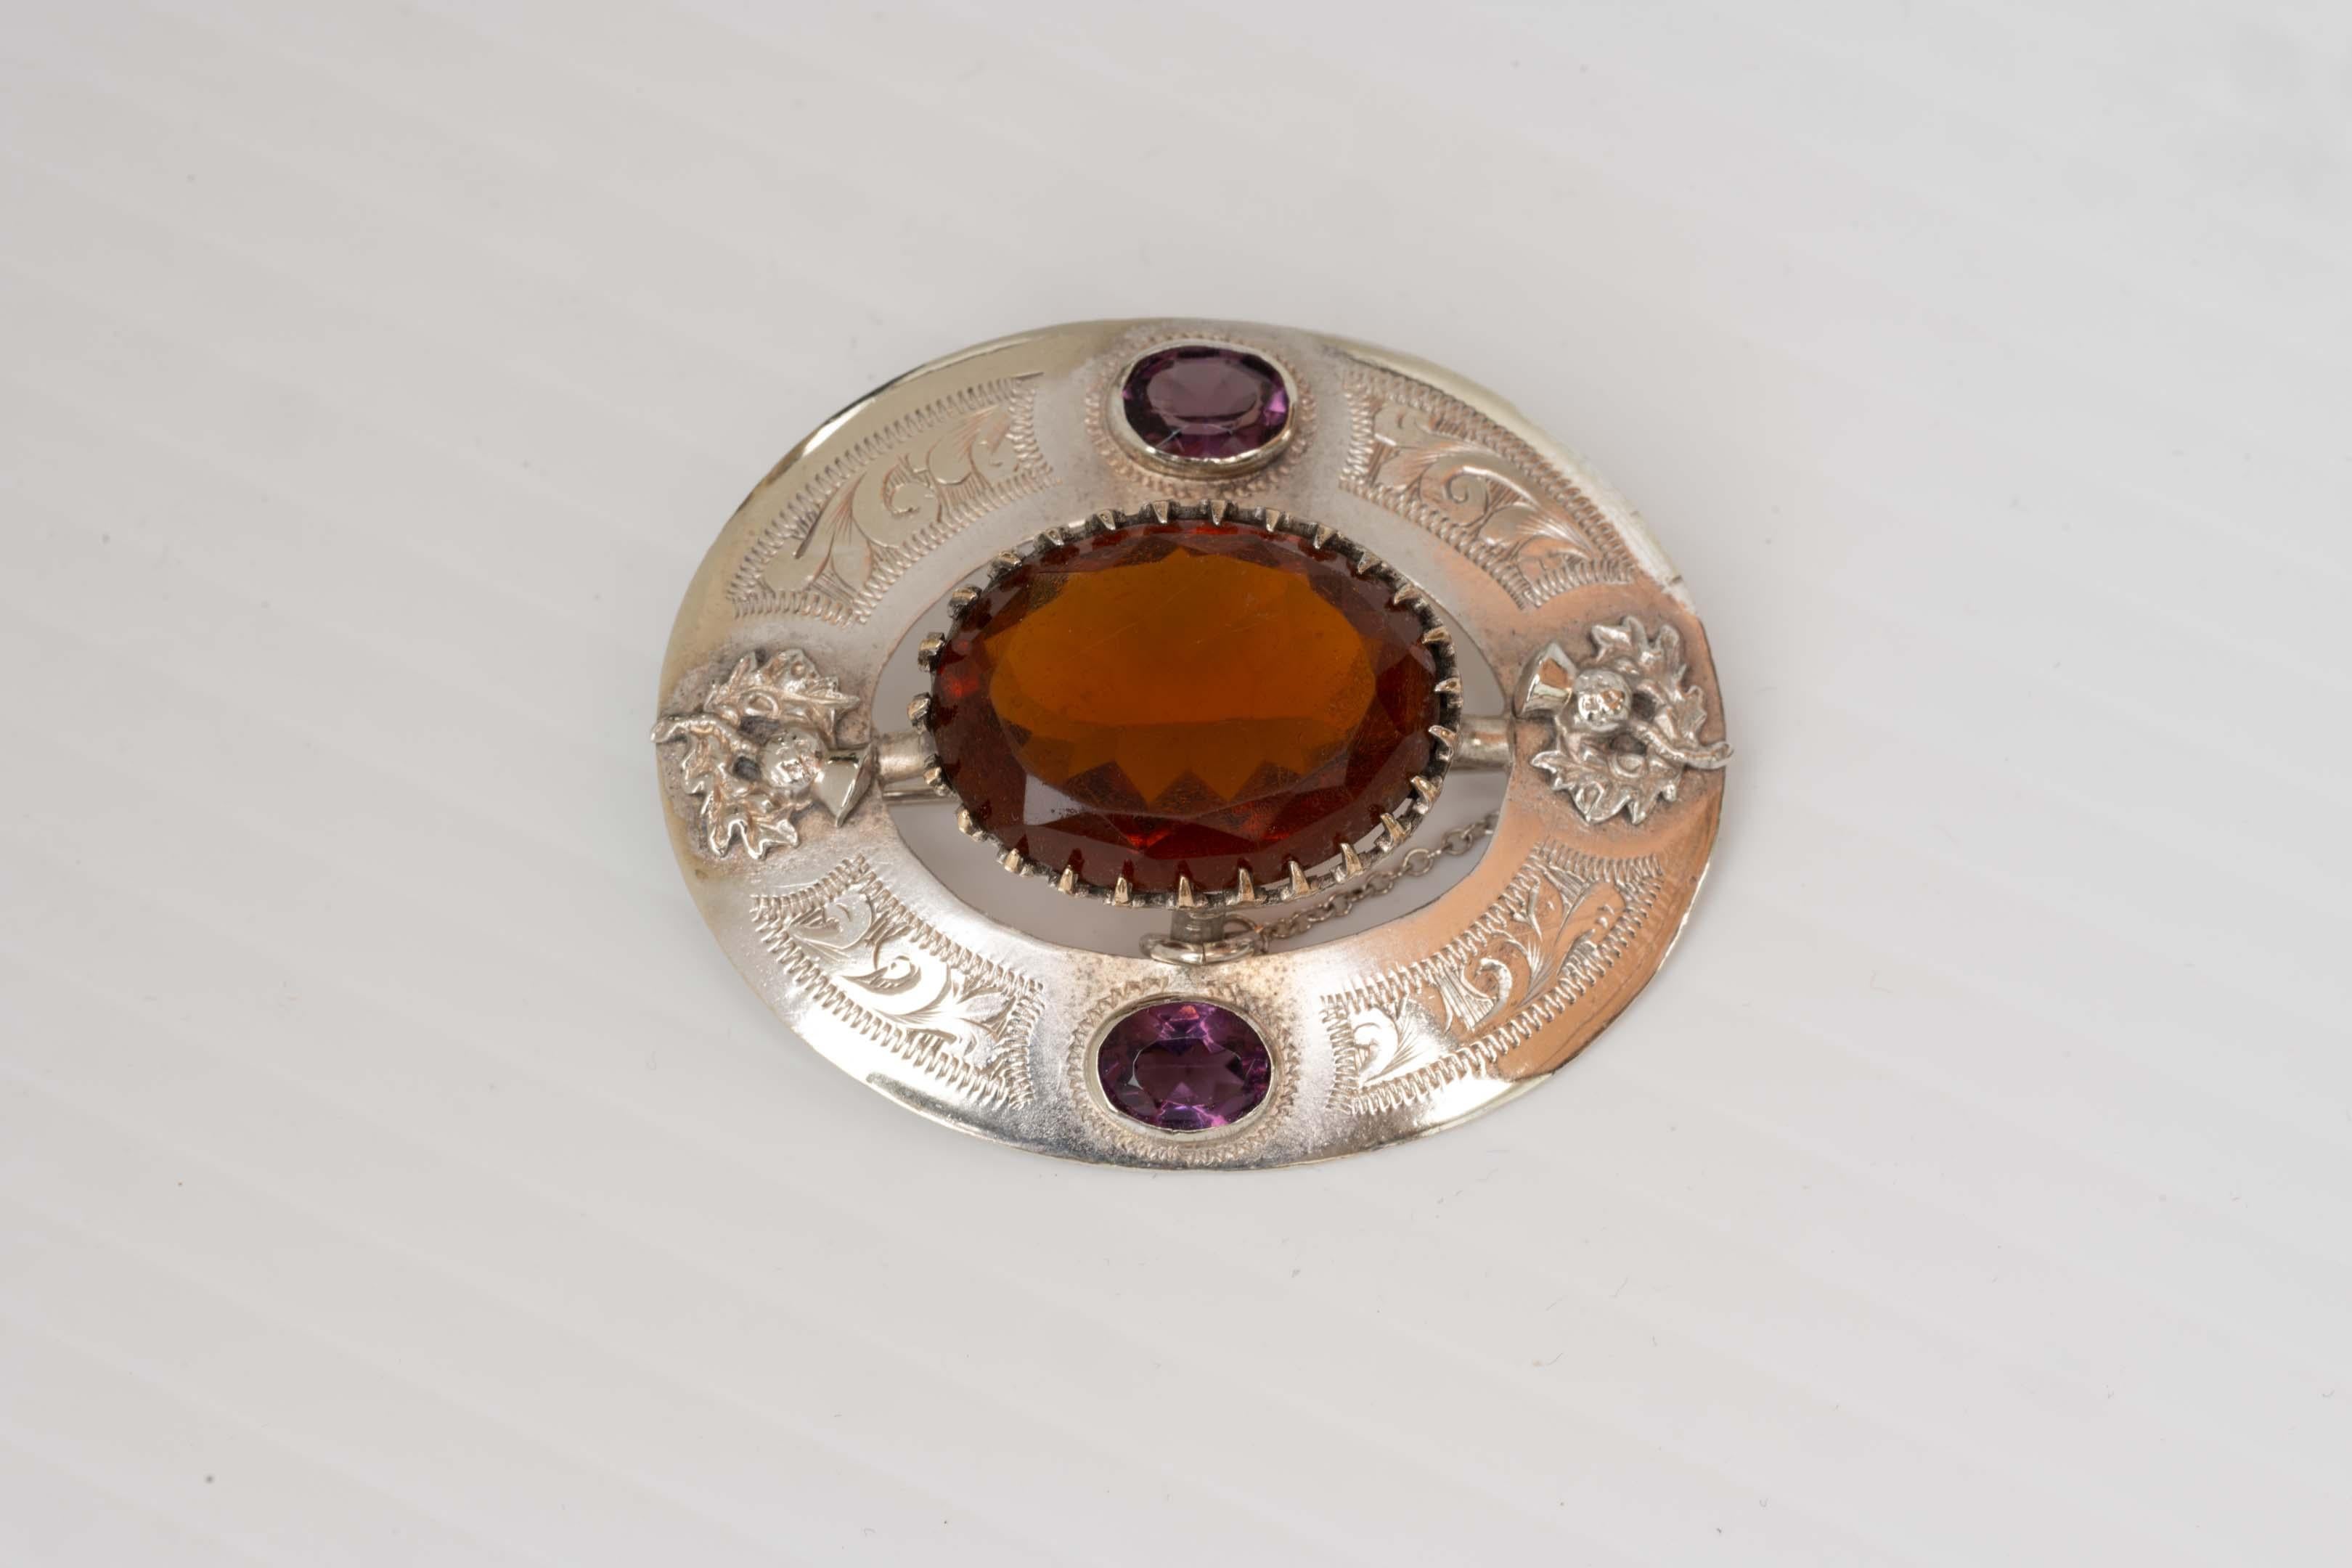 Antique Victorian sterling silver Scottish thistle brooch circa 1870 with amethyst and citrine topaz colour glass stone and thistle design. Not stamped but acid tested. Made in the UK, measures 5cm x 4.1 cm ( 15/8 inches x 2 inches). In good